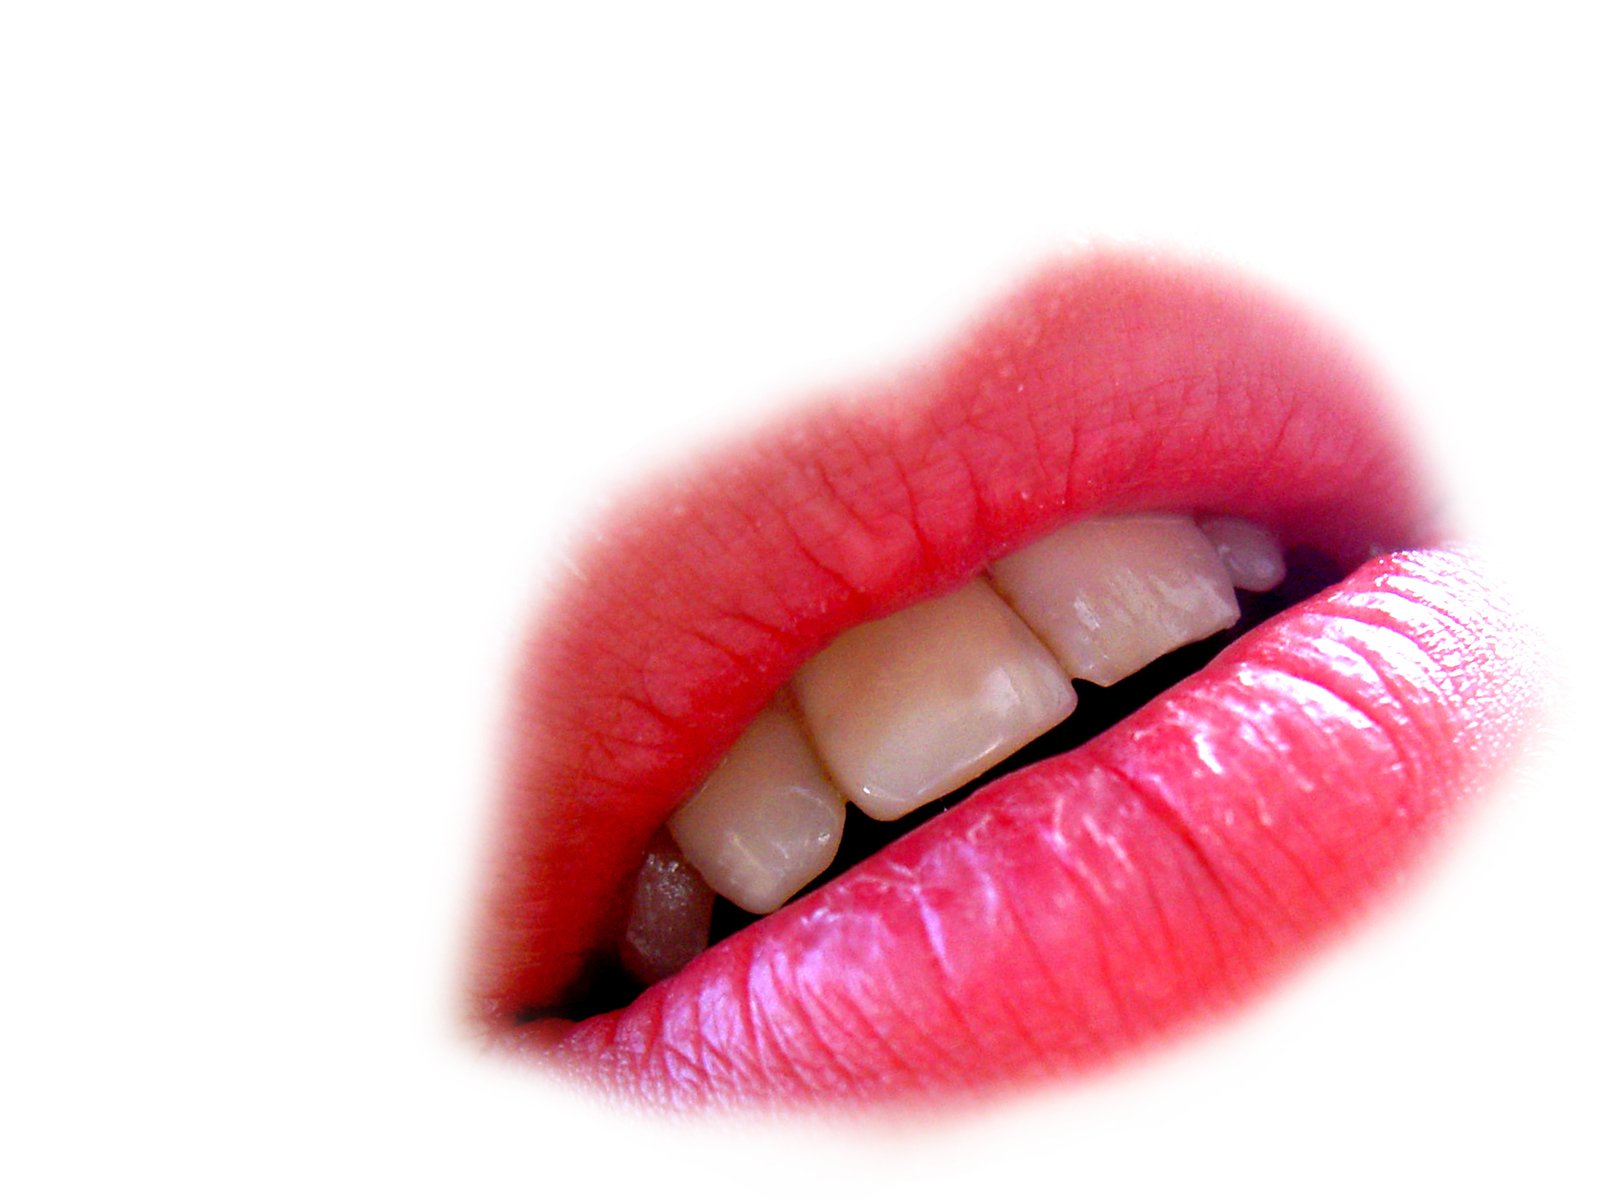 a close up image of a woman's lips and lip ring